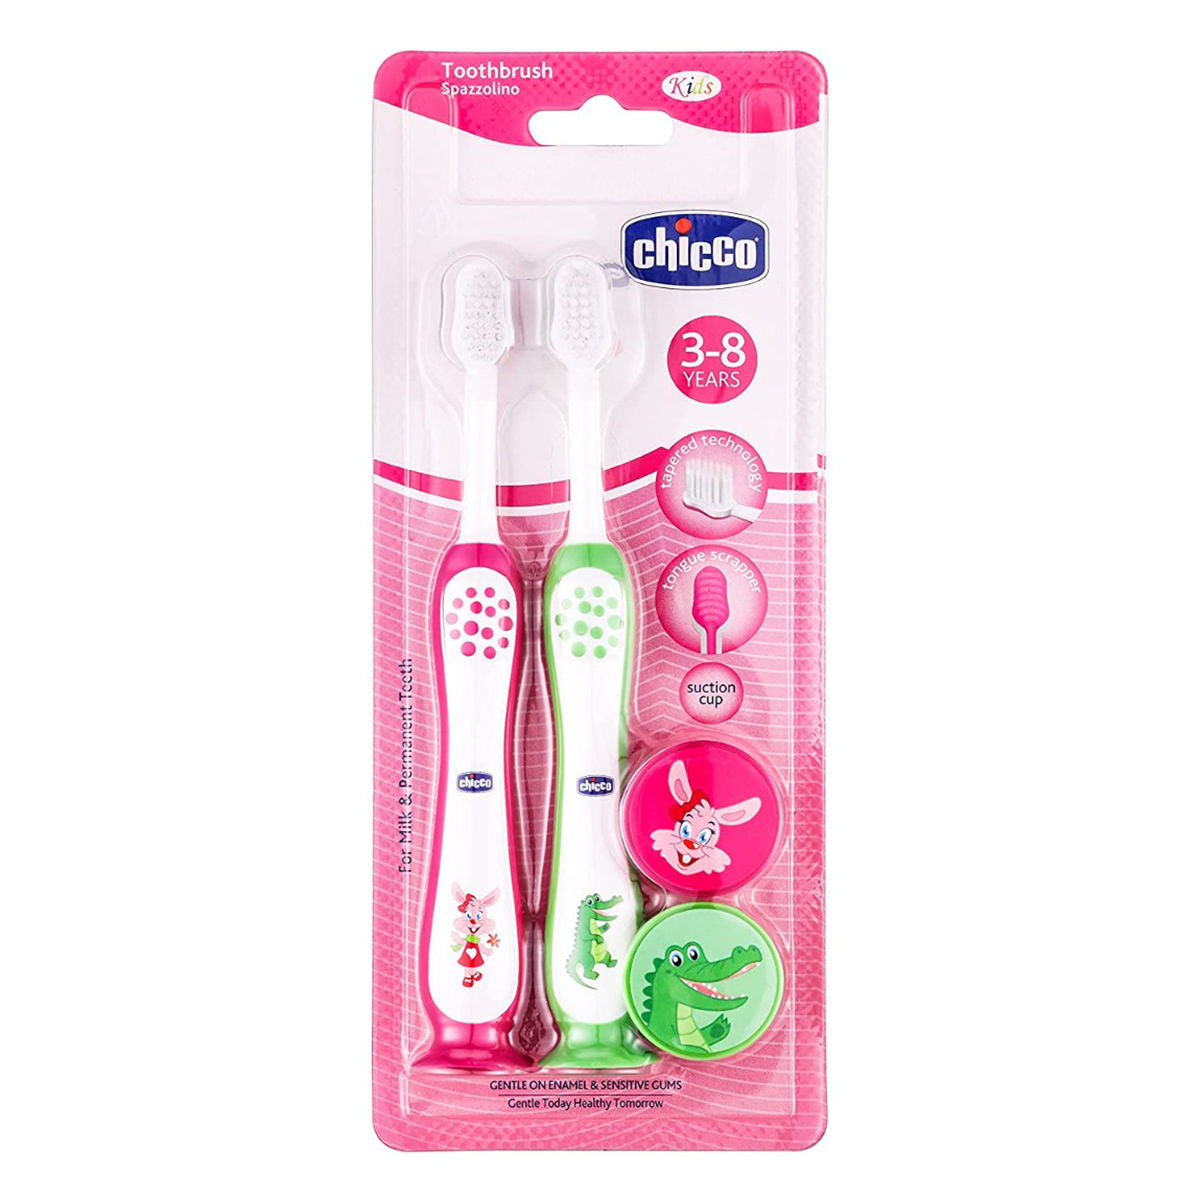 Buy Chicco Soft Pink & Green Toothbrush for 3-8 Year Kids, 2 Count Online